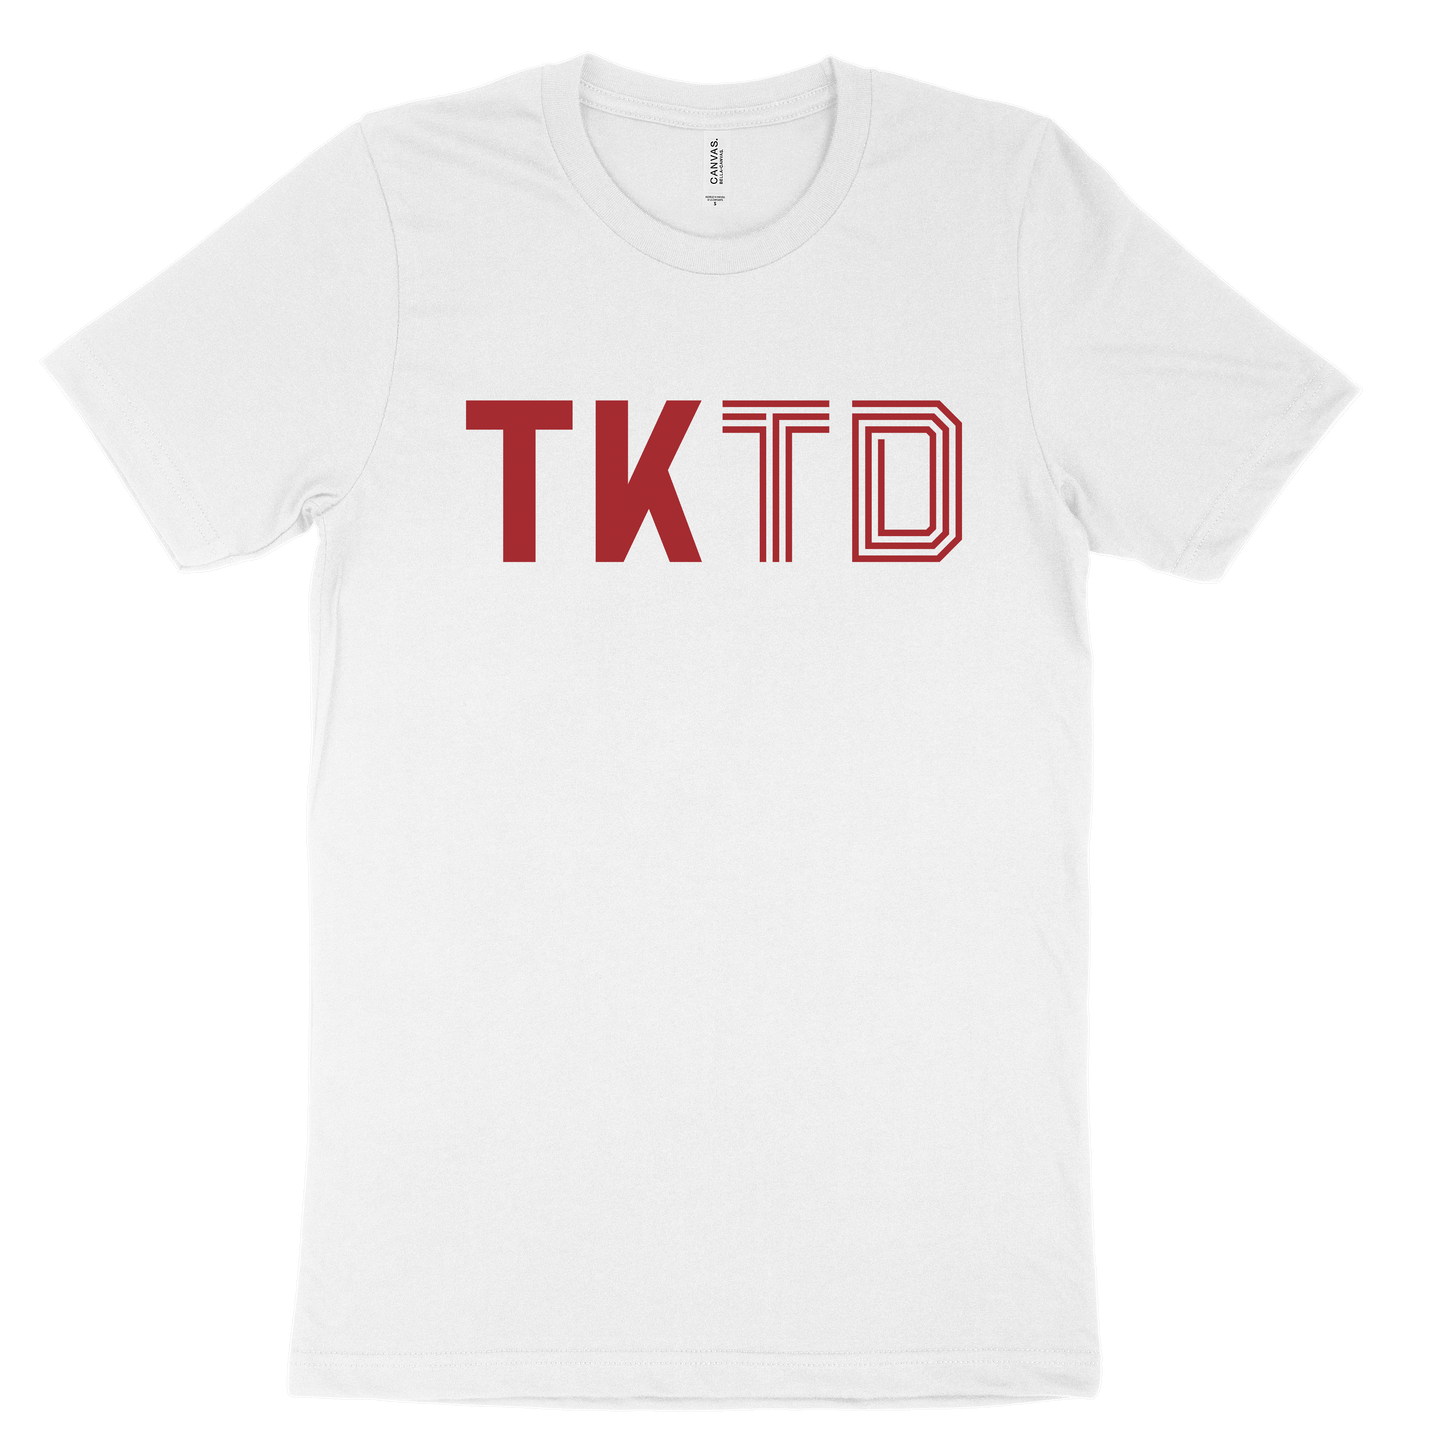 TKTD Tee - White Red